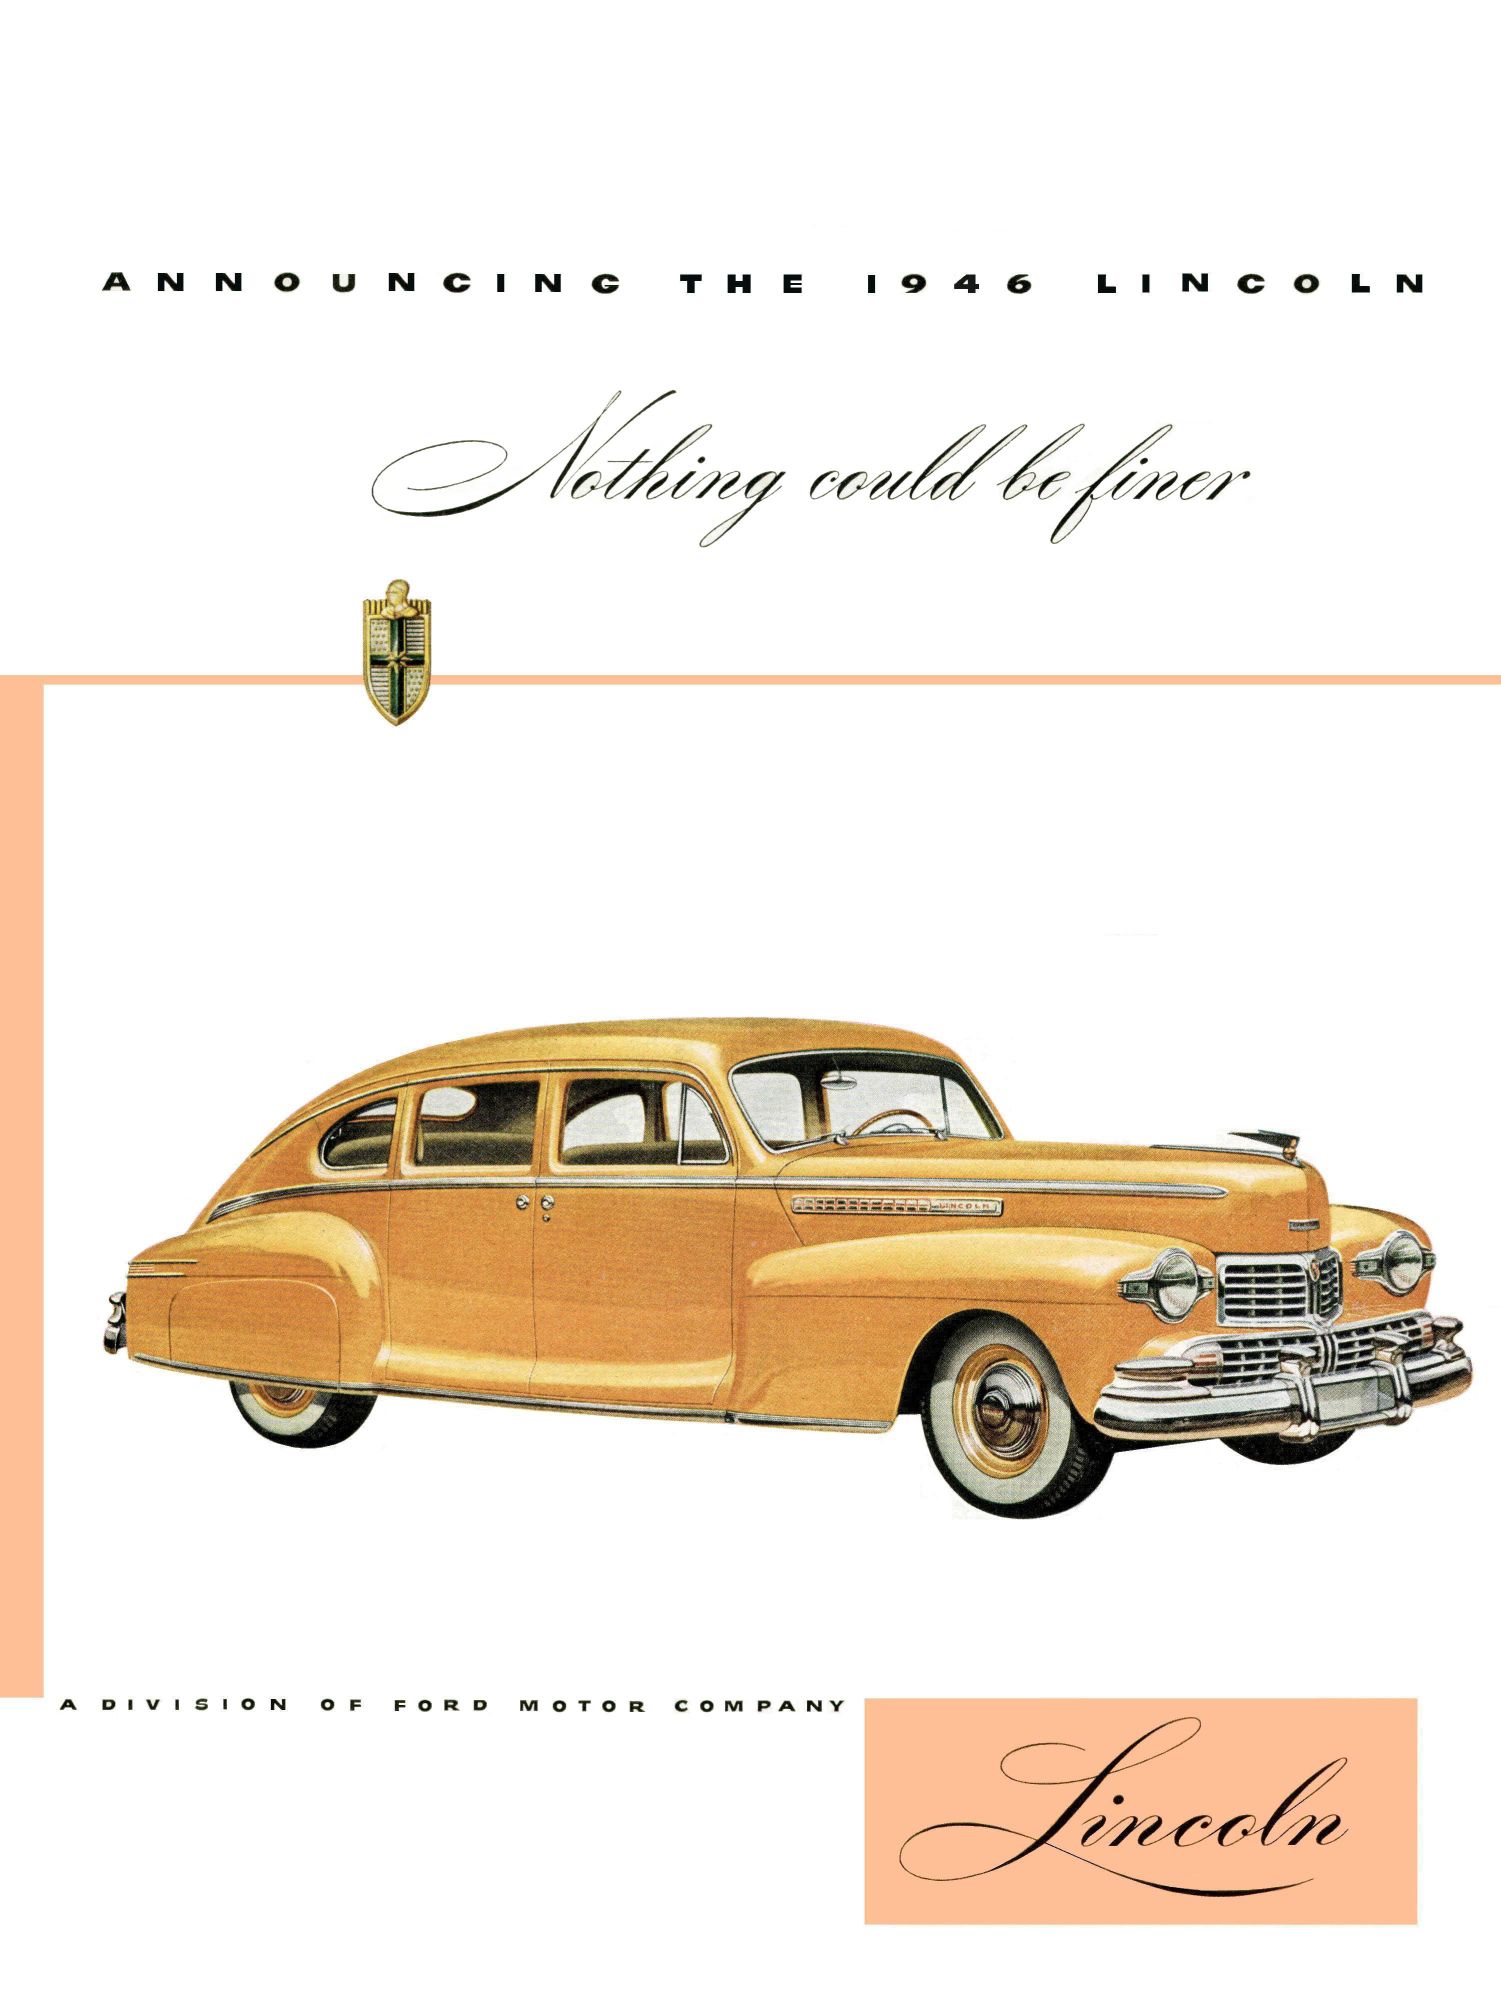 1946 Lincoln Auto Advertising